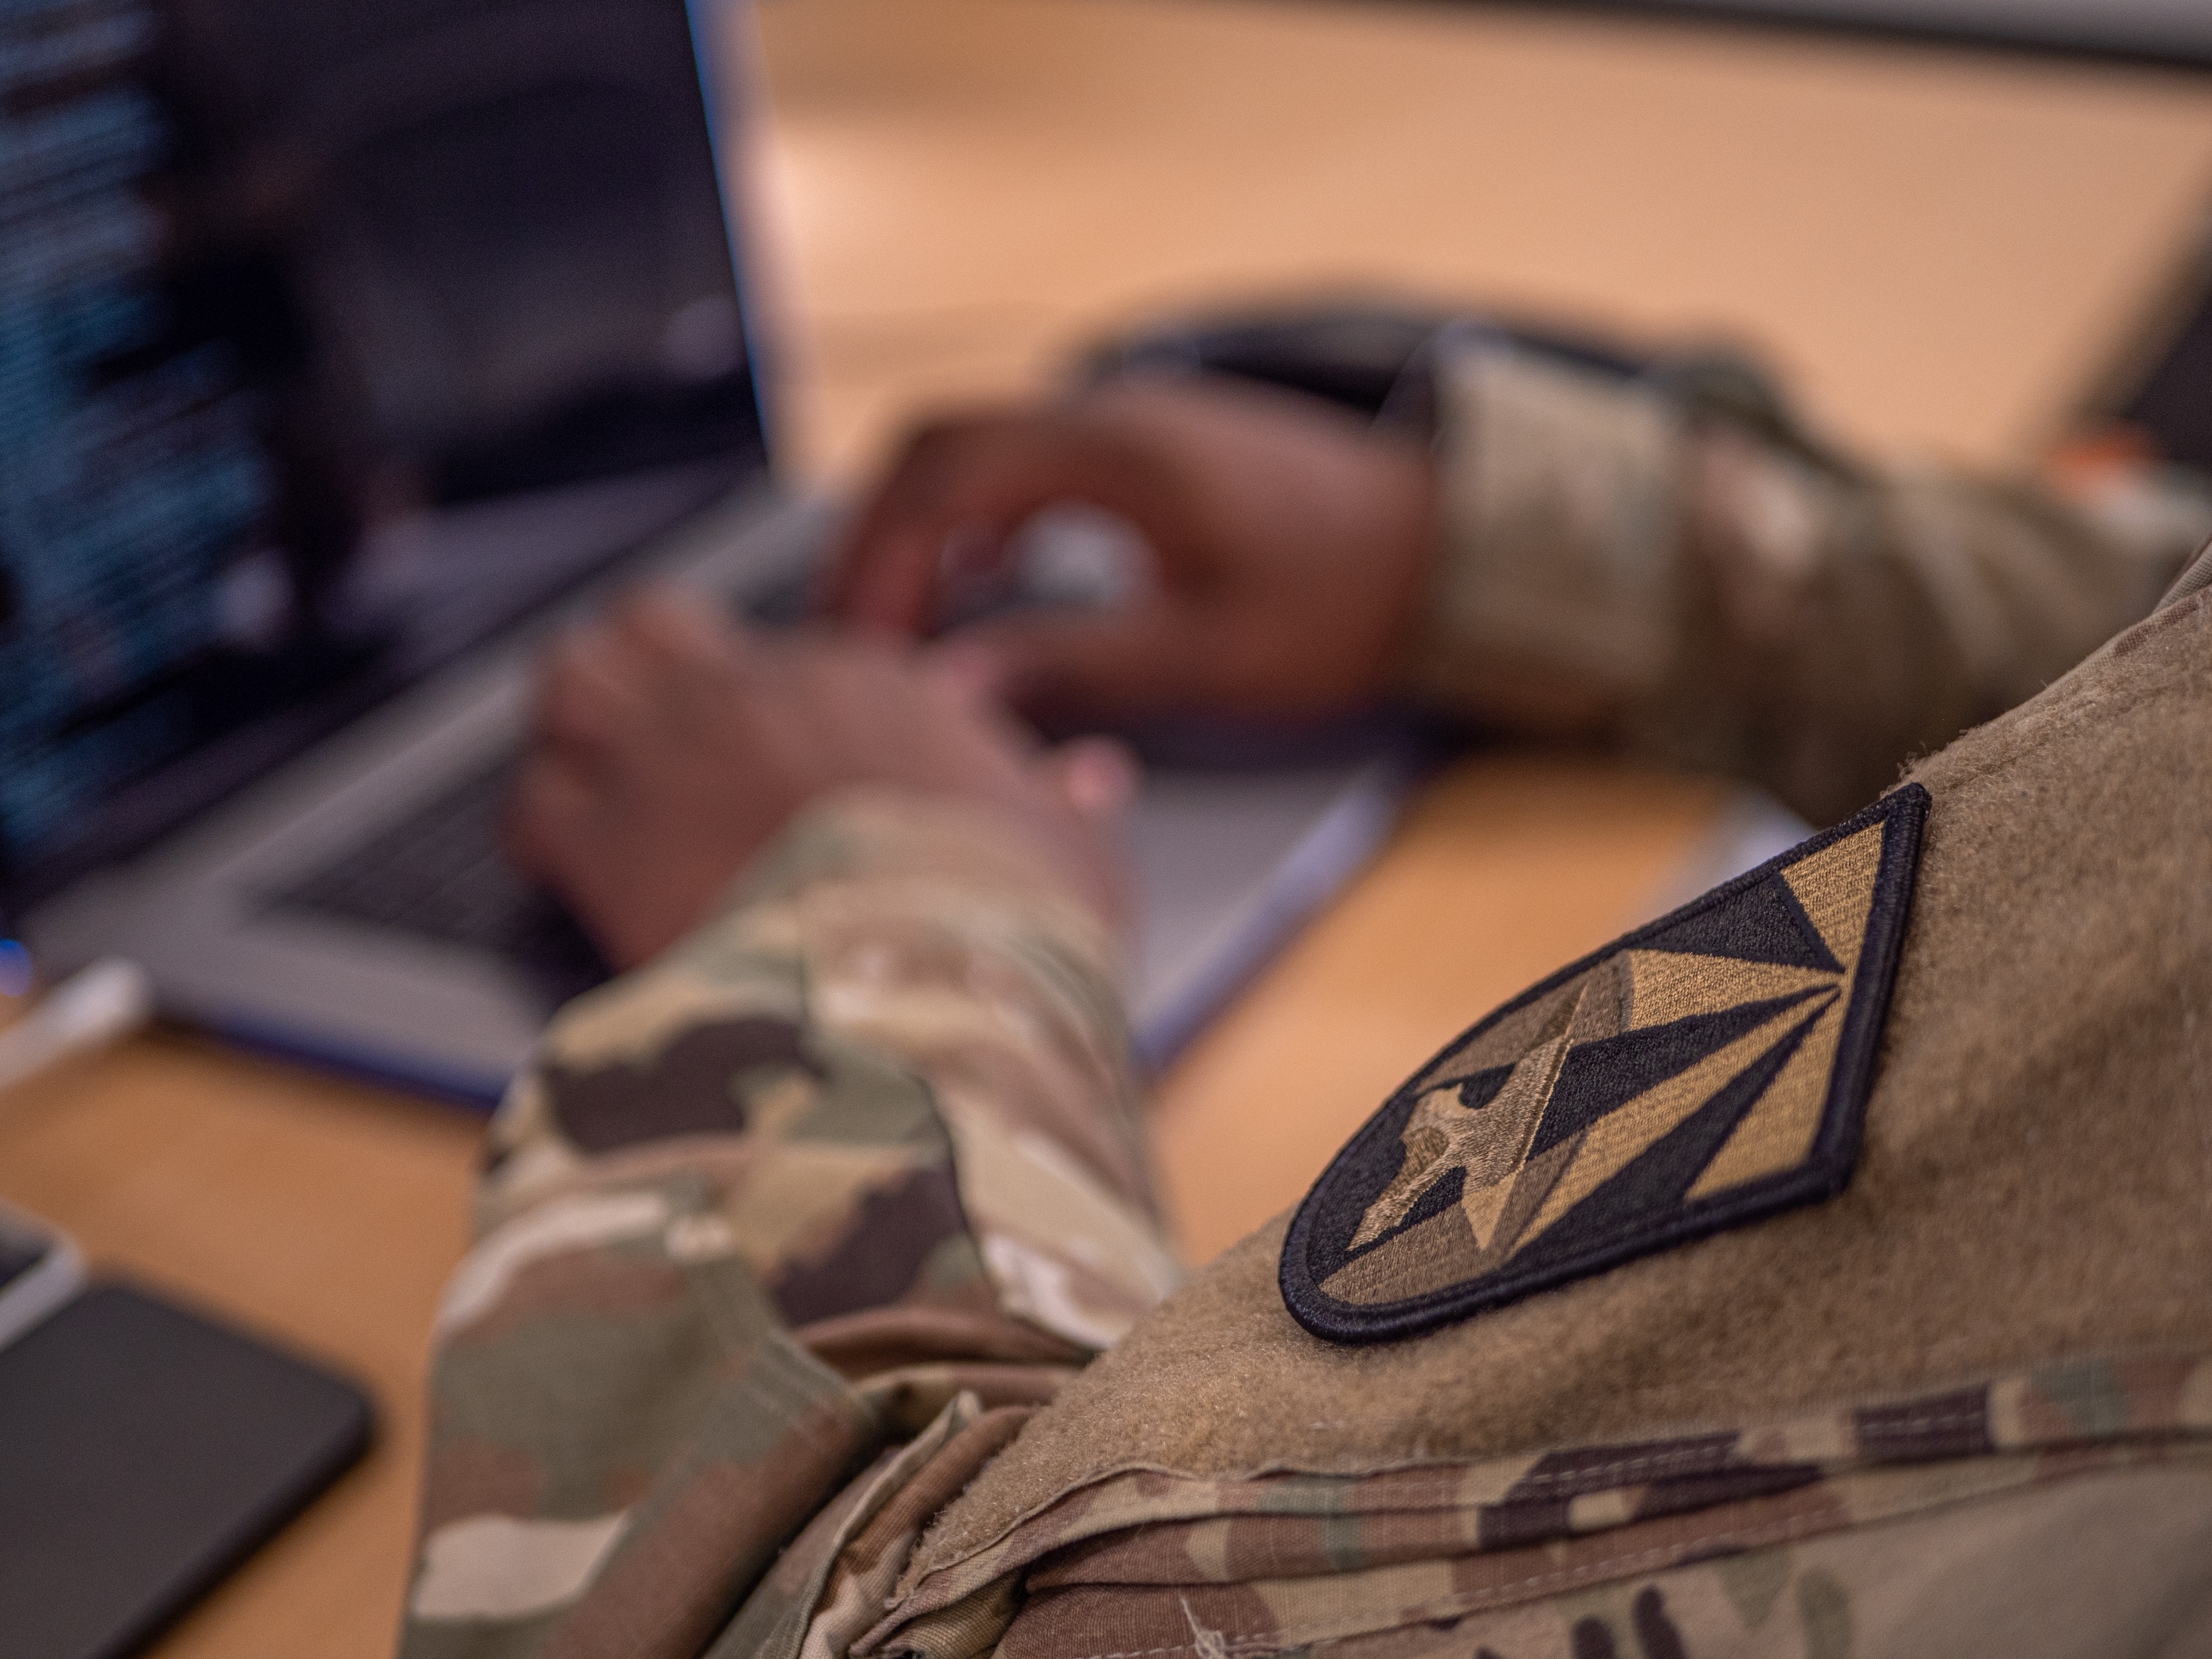 In 2020, Army Futures Command launched the Army Software Factory designed to build and sustain a Soldier-led software development capability to raise the level of digital proficiency across the Army for future warfare in 2028 and beyond. (U.S. Army photo by Patrick Enright)